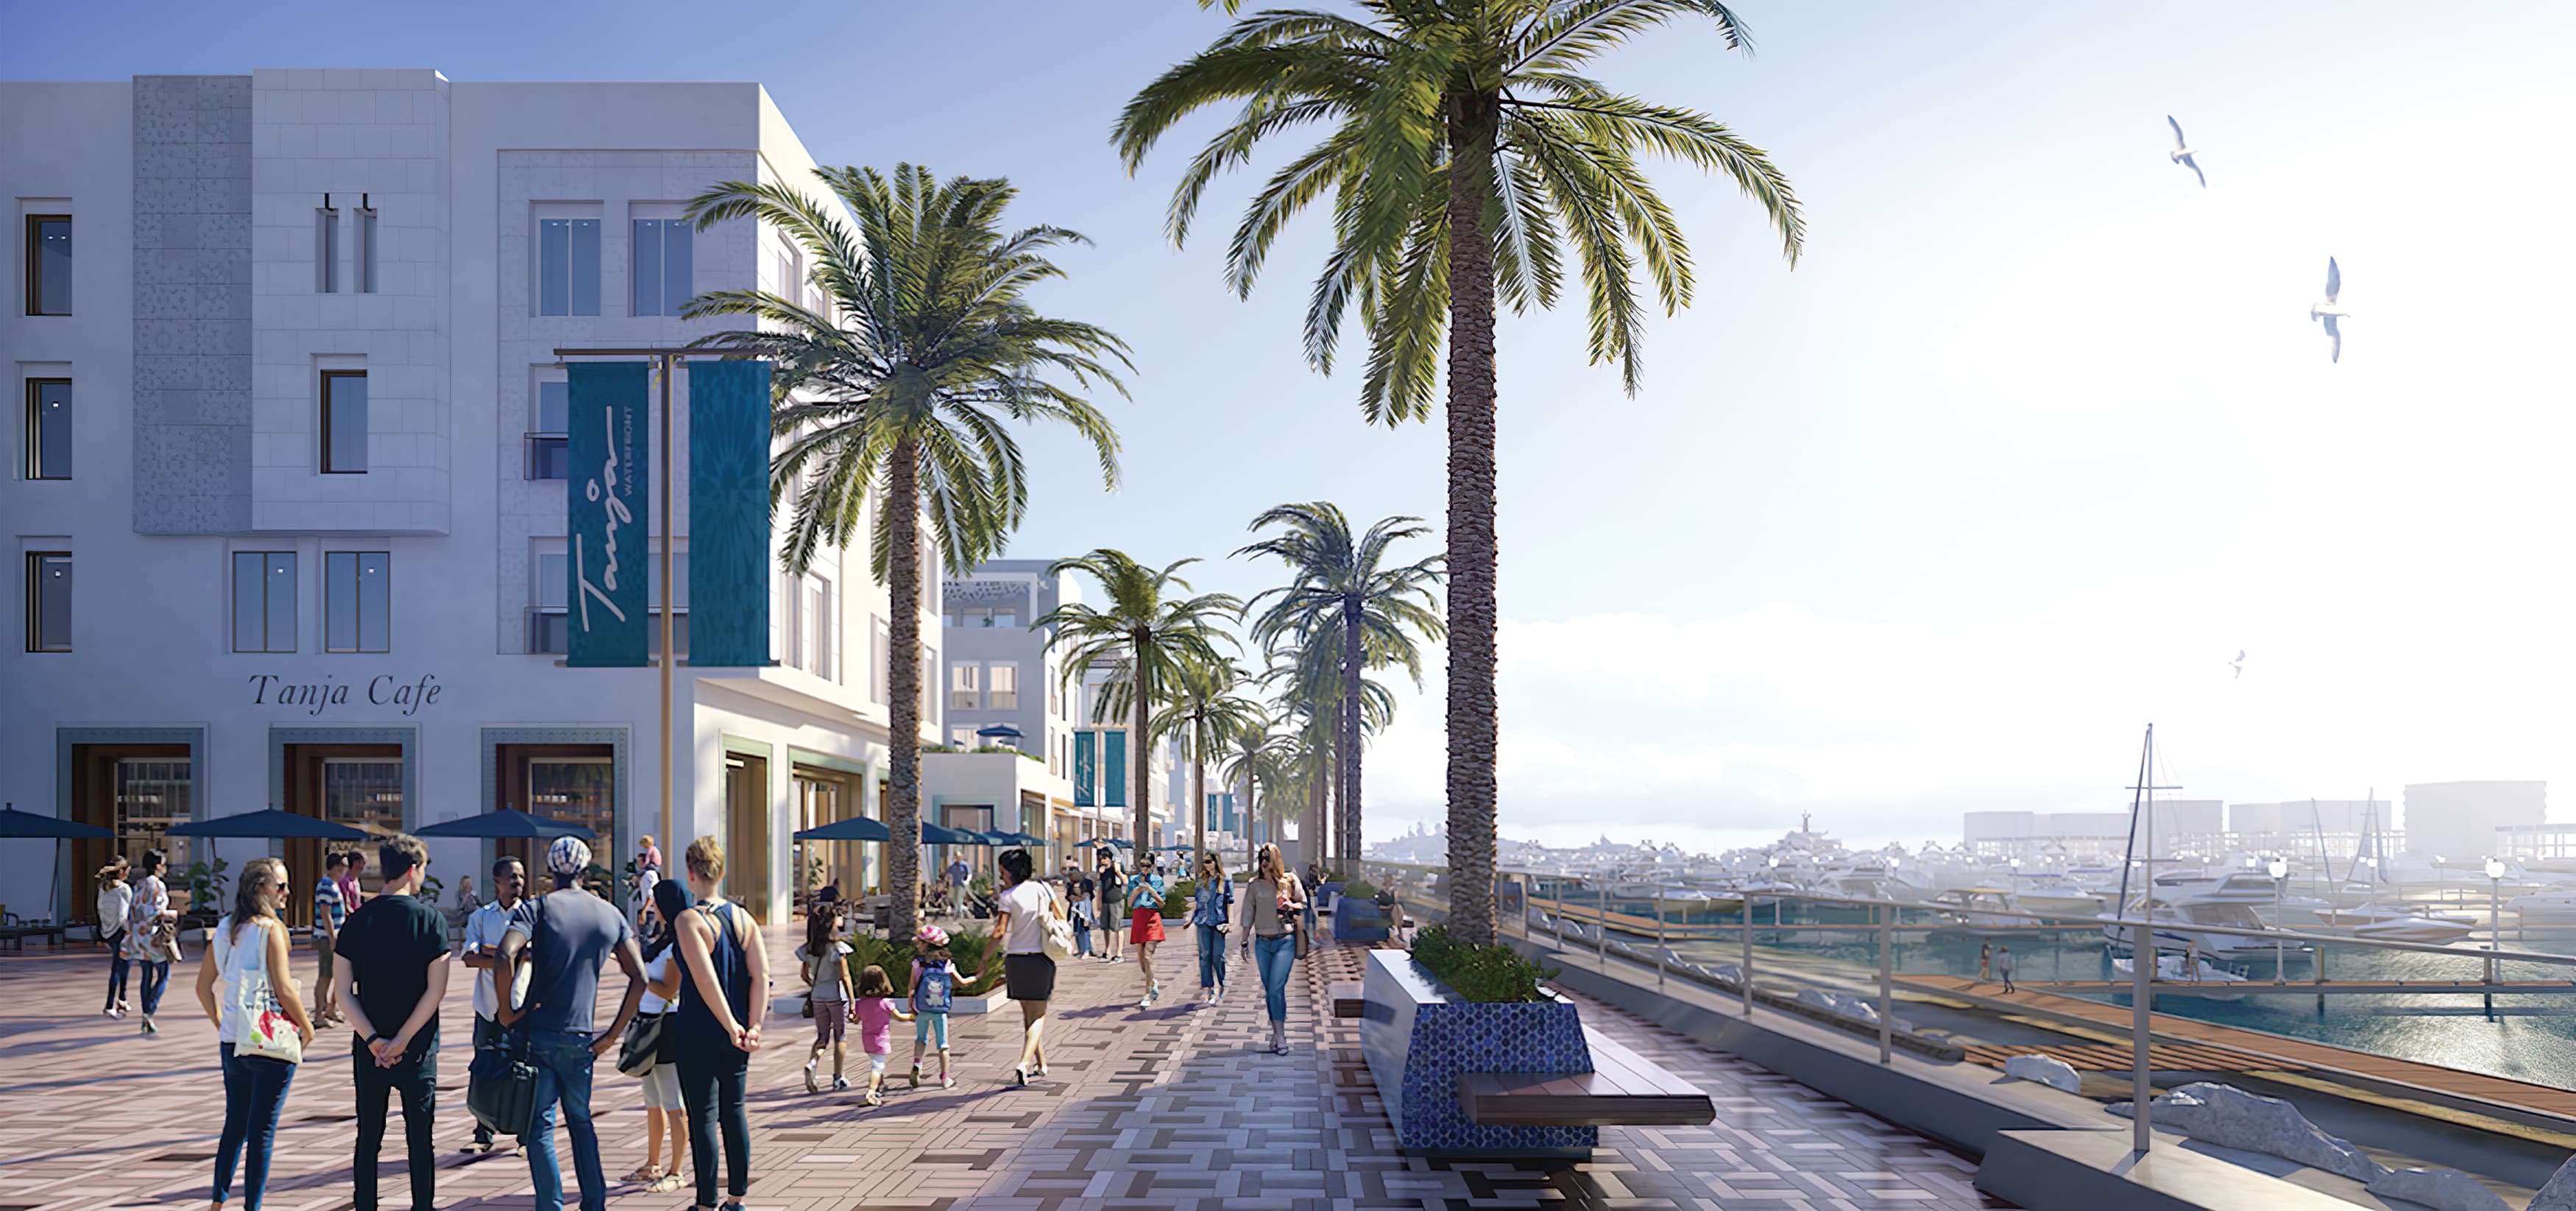 Tanja Waterfront, a Civic, Mixed-Use, Waterfront project near Tangier, Morocco. RSM Design looked at Environmental Graphic Design, Wayfinding Signage, and Placemaking.